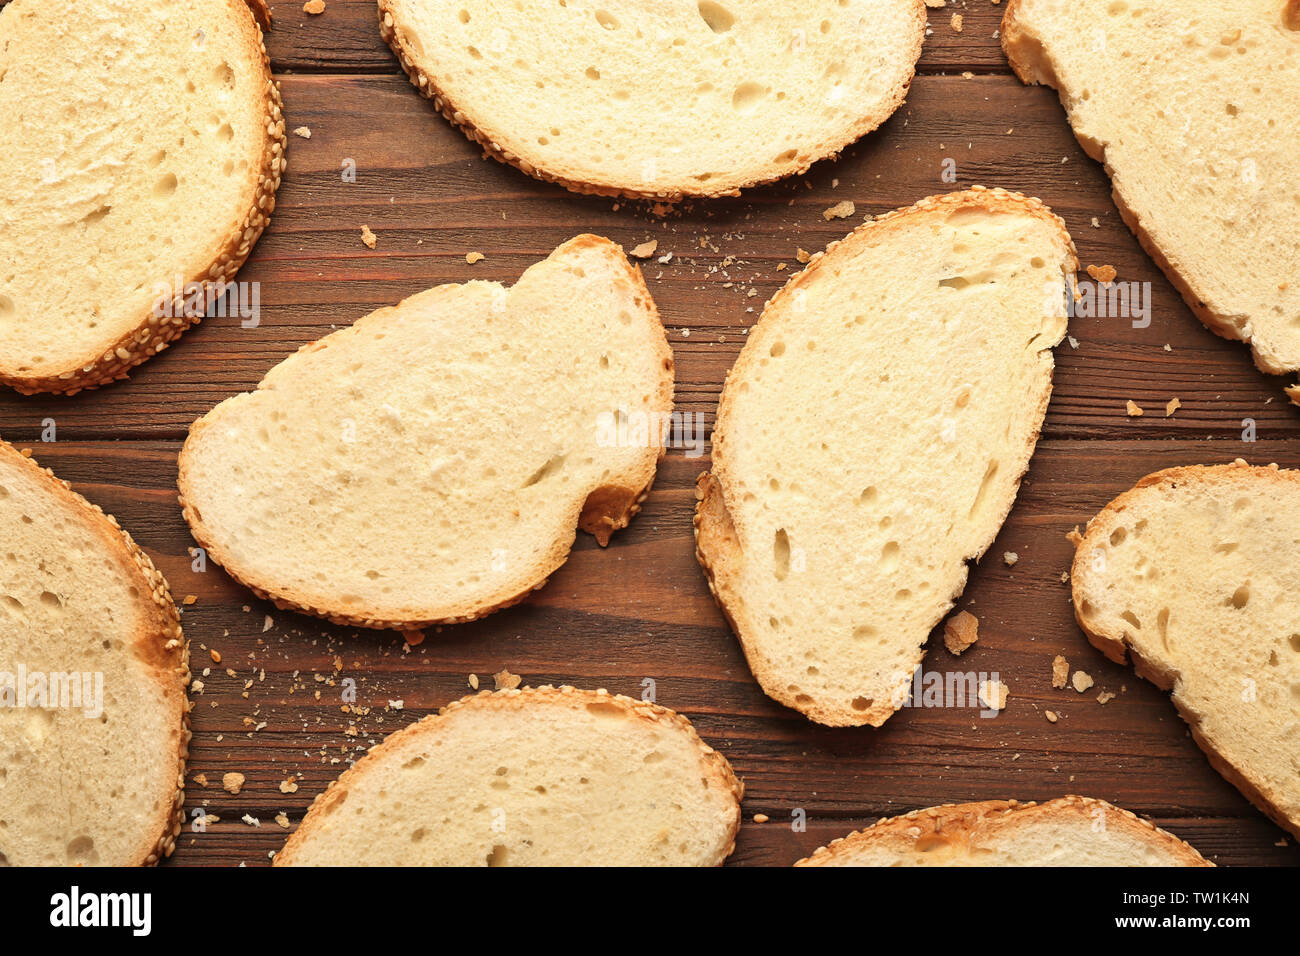 Slices and crumbs of wheaten bread on wooden background Stock Photo